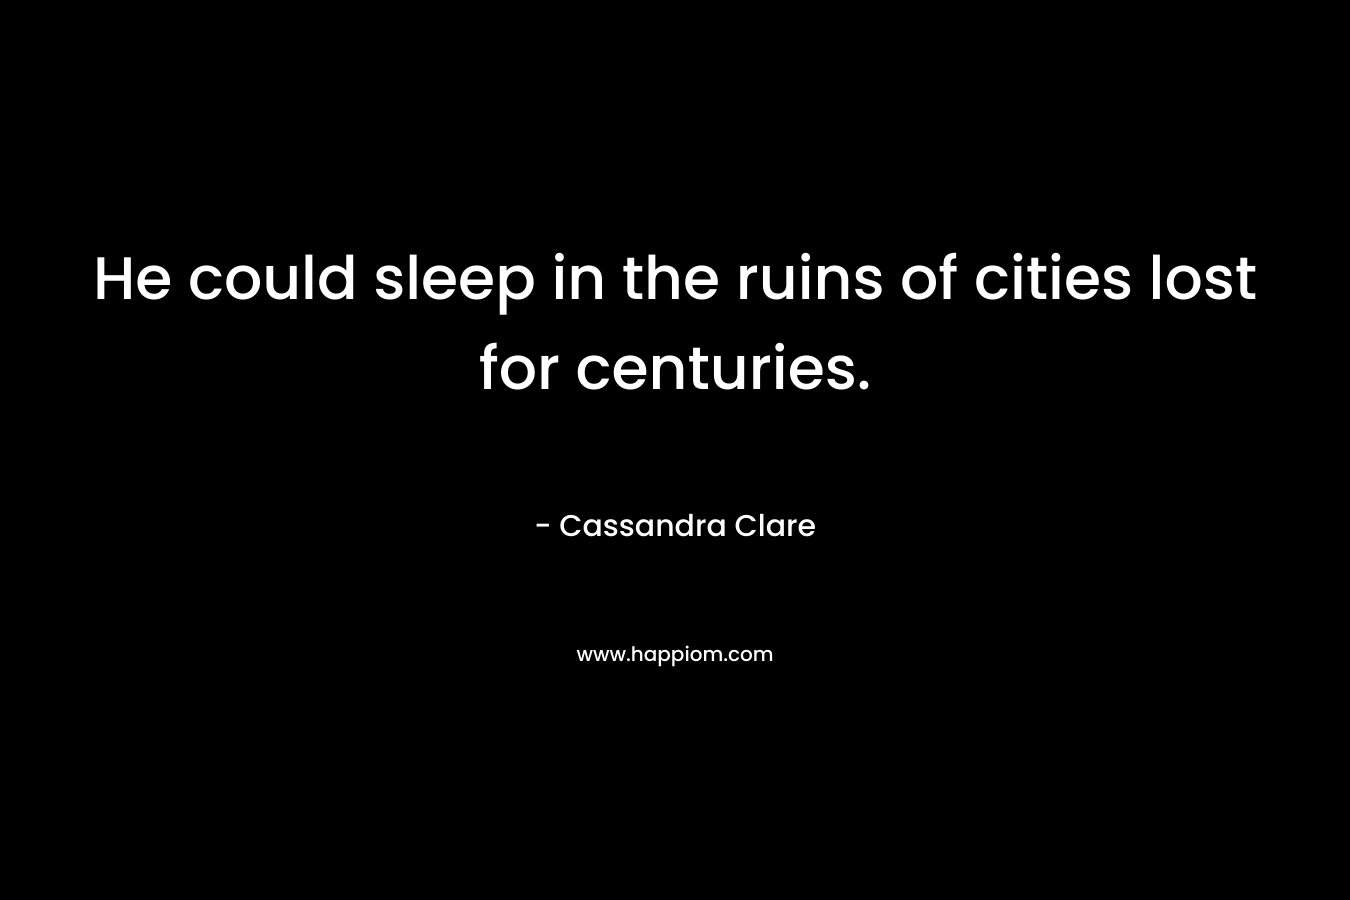 He could sleep in the ruins of cities lost for centuries. – Cassandra Clare